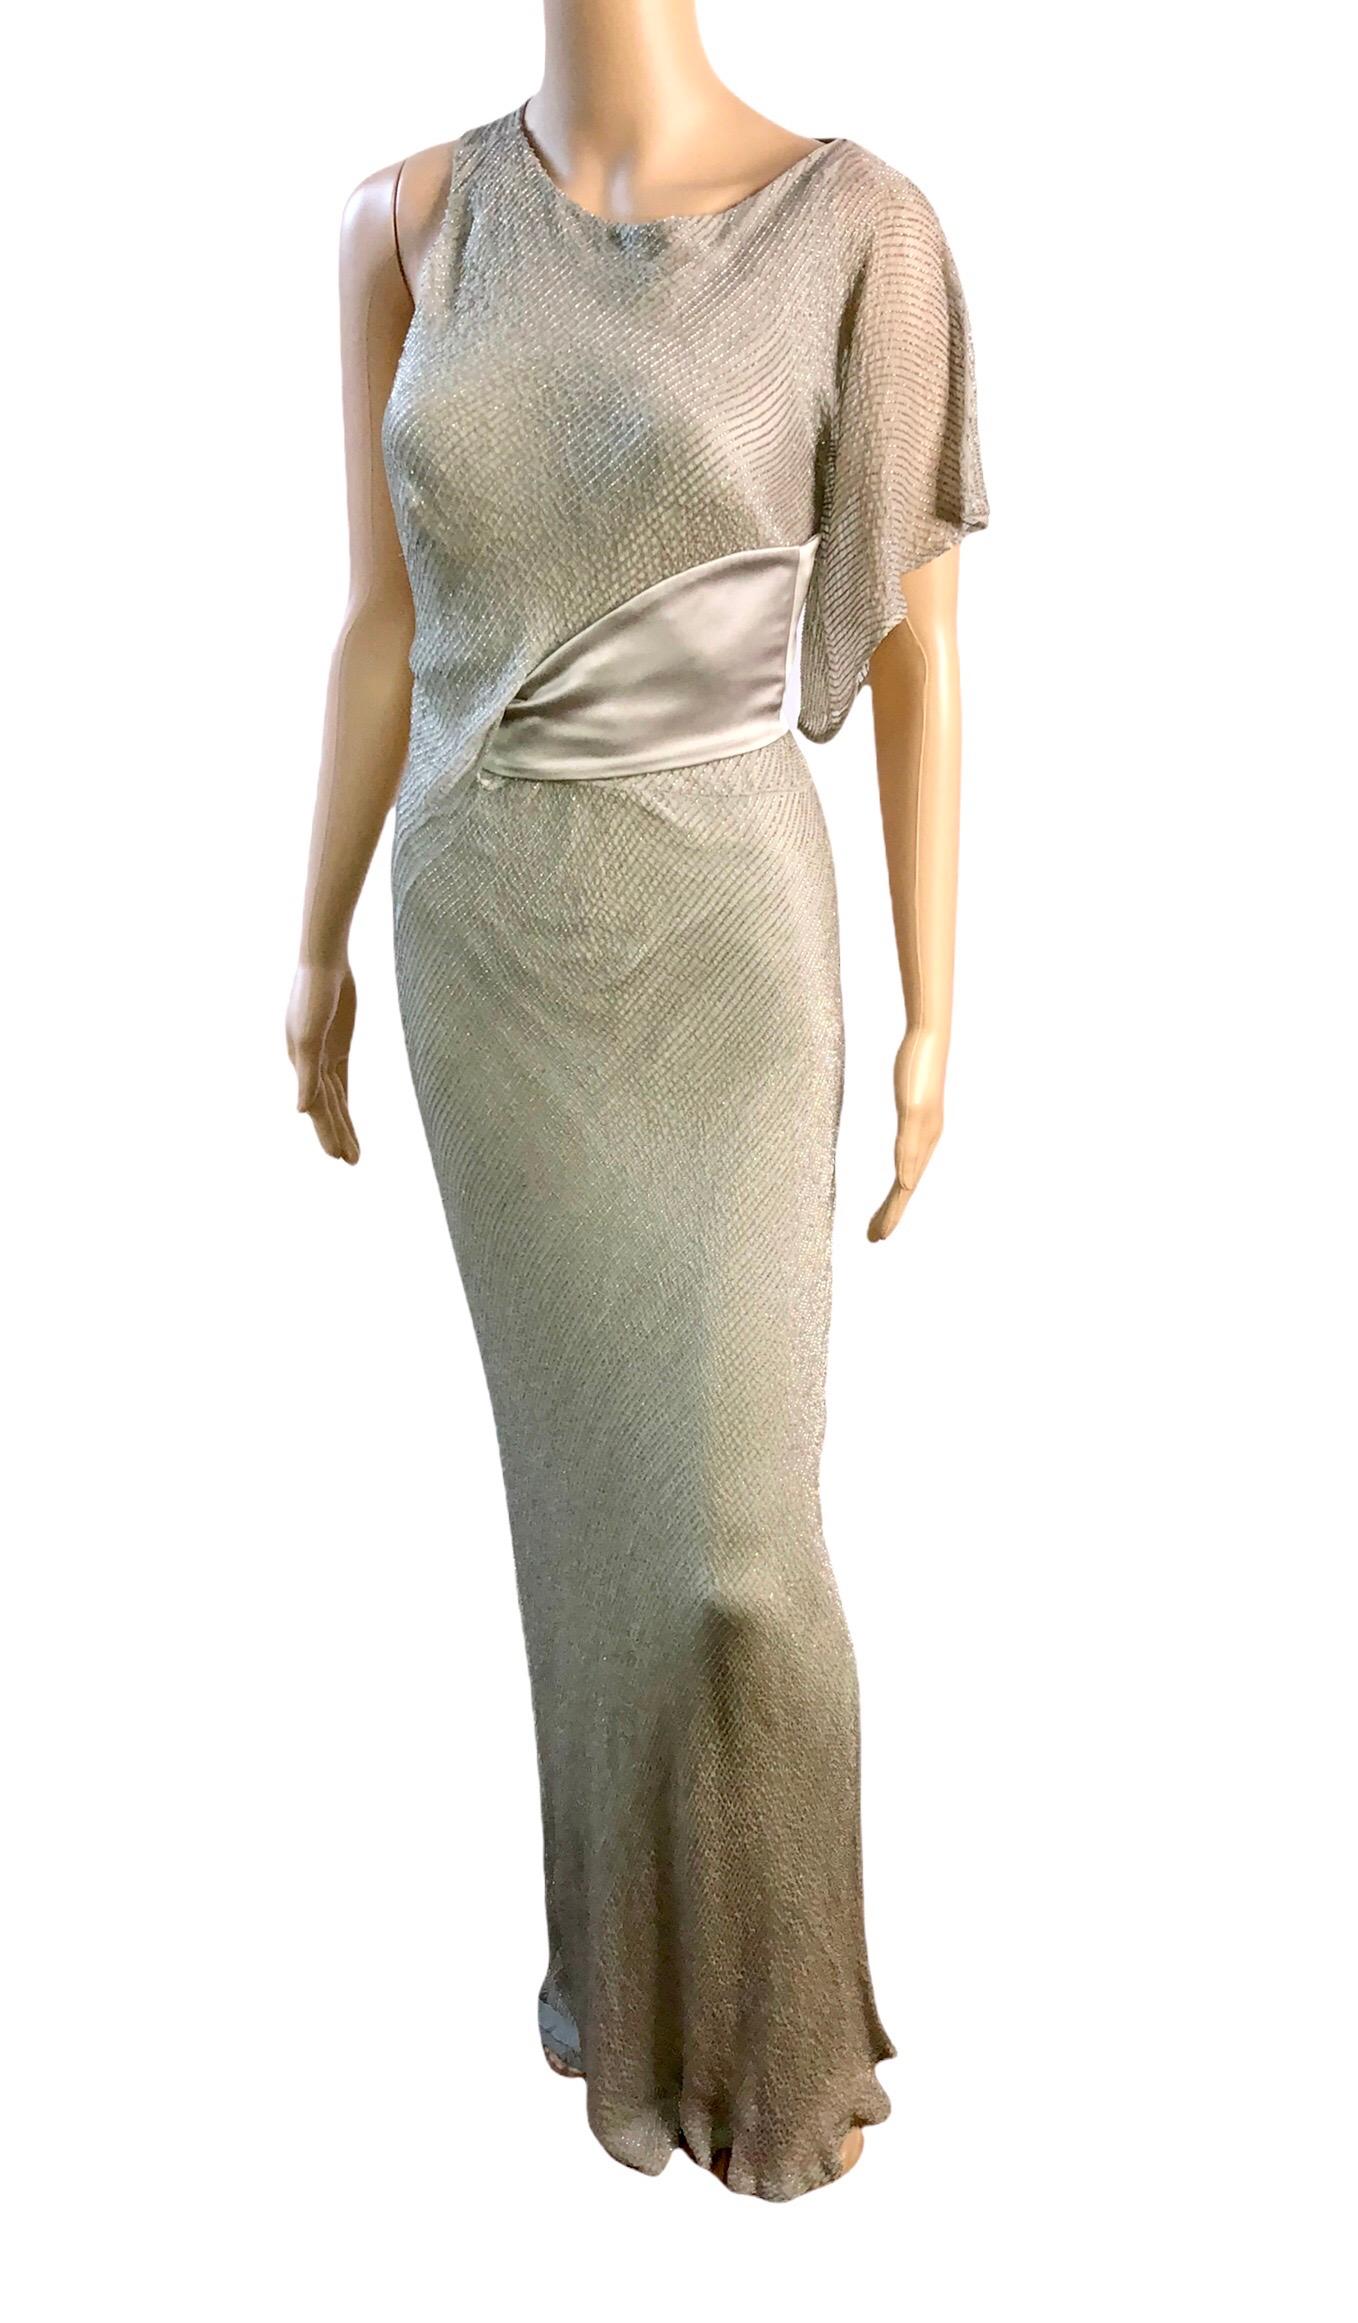 Versace F/W 2009 Runway Embellished Cutout Belted Silk Metallic Silver Evening Dress Gown IT 38

Look 40 from the Fall 2009 Collection.
